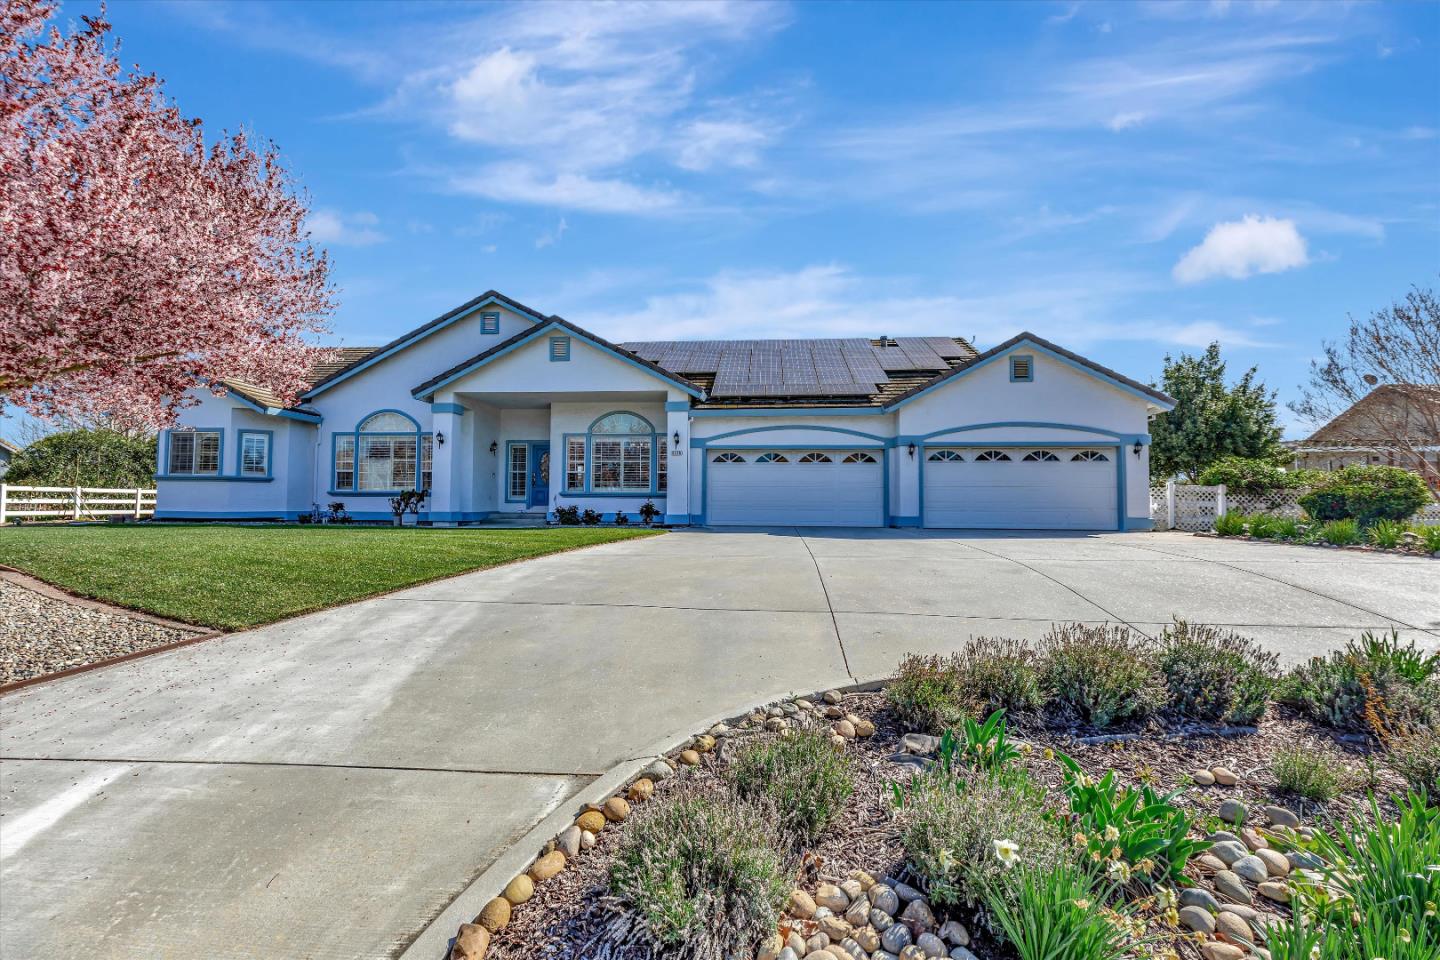 Photo of 6355 Dunnville Wy in Hollister, CA